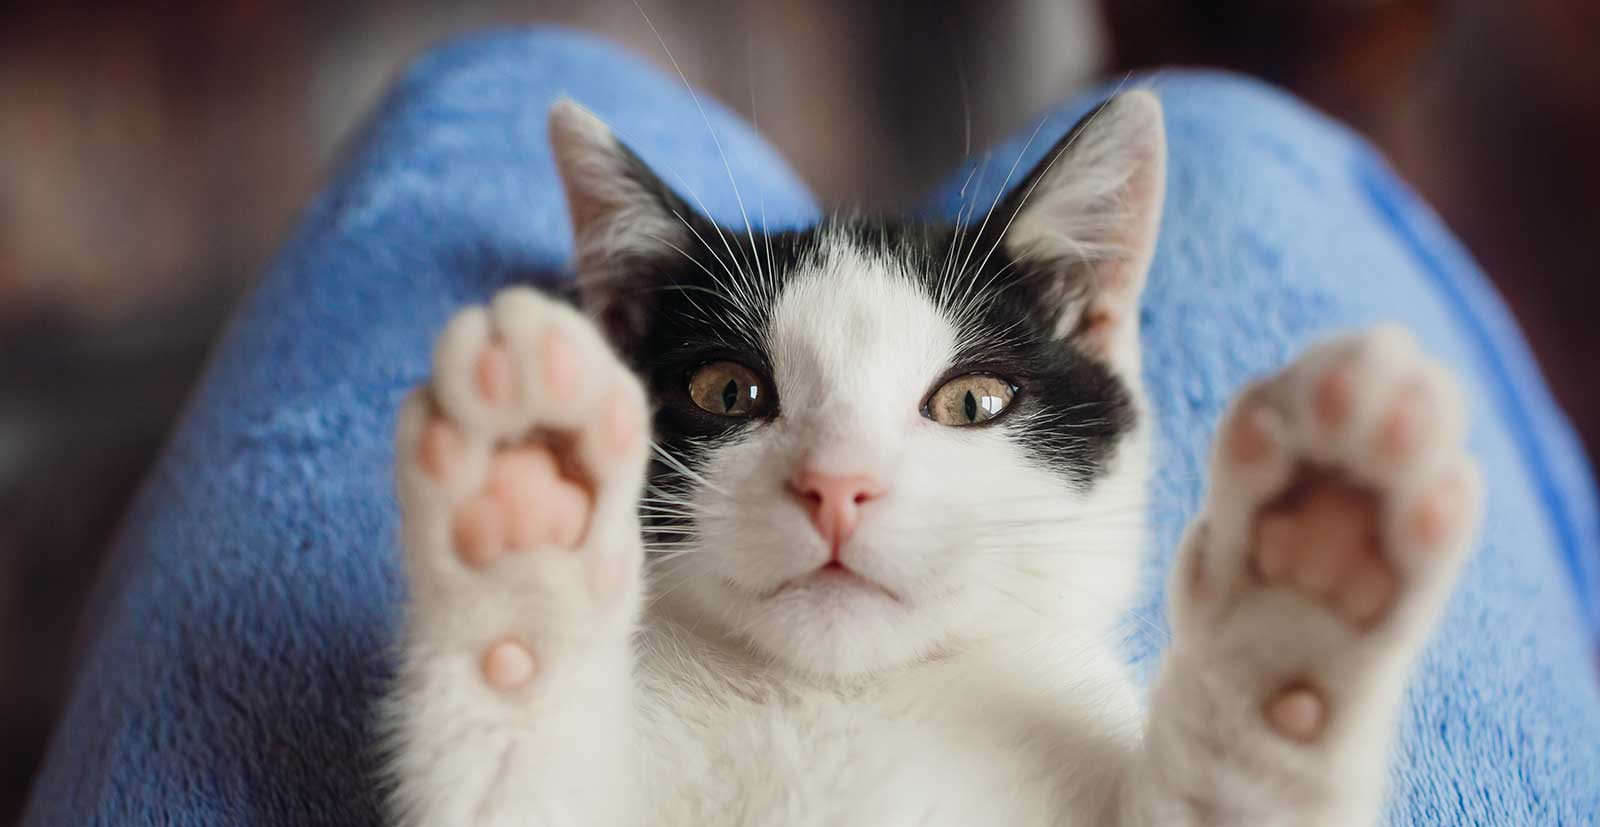 A cat holding up its paws